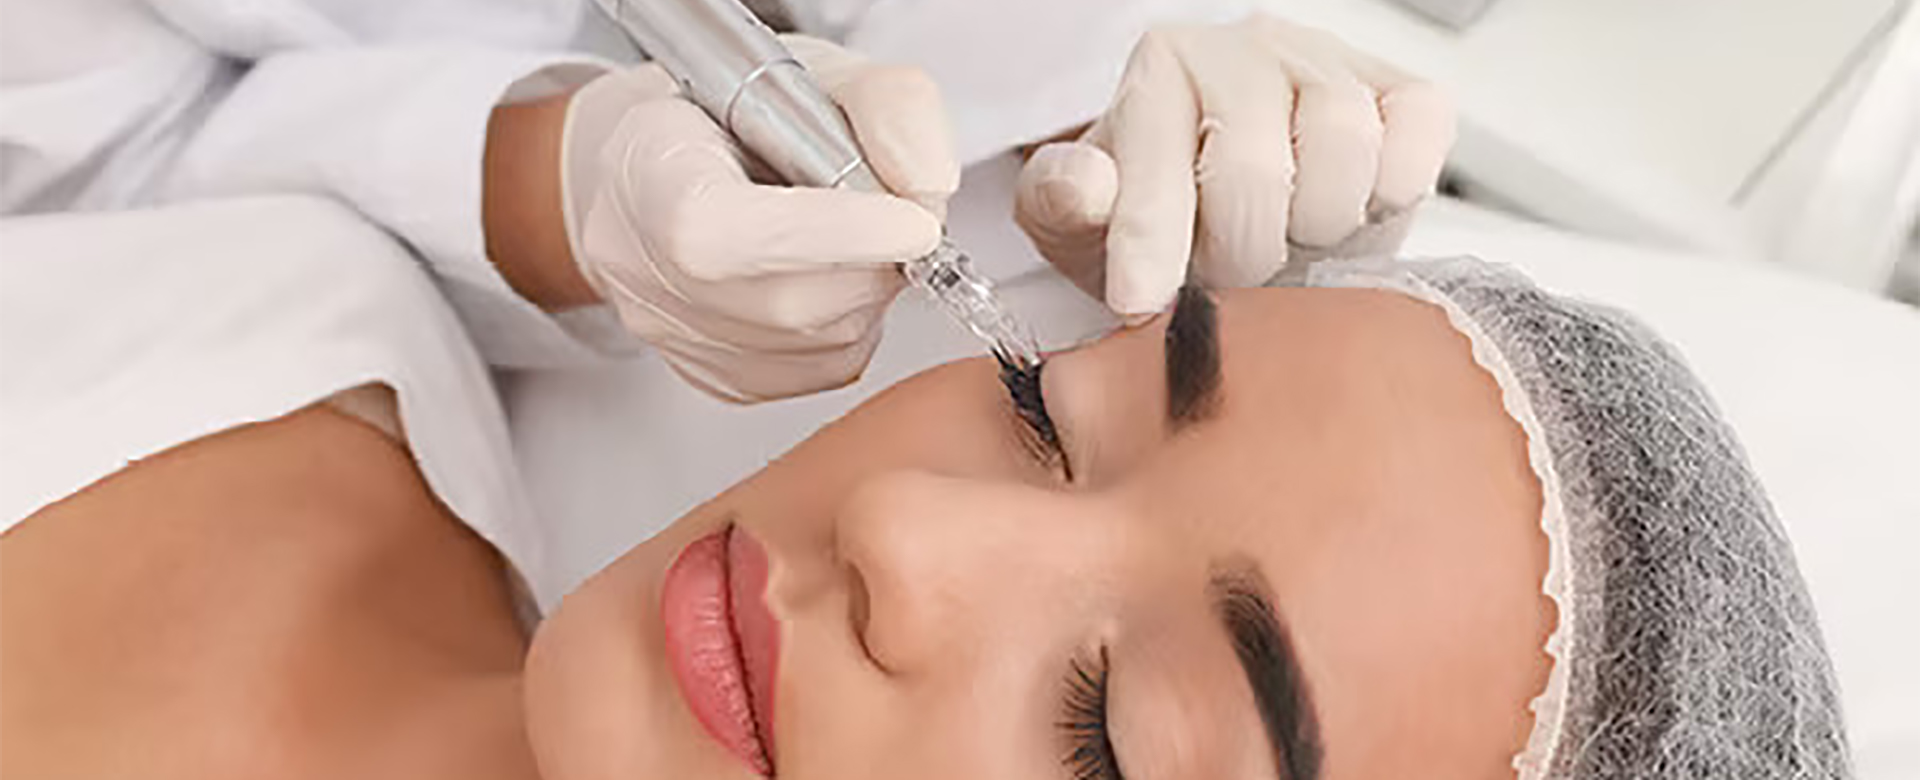 The Face Center - Skin Boosters | Aesthetic Treatments